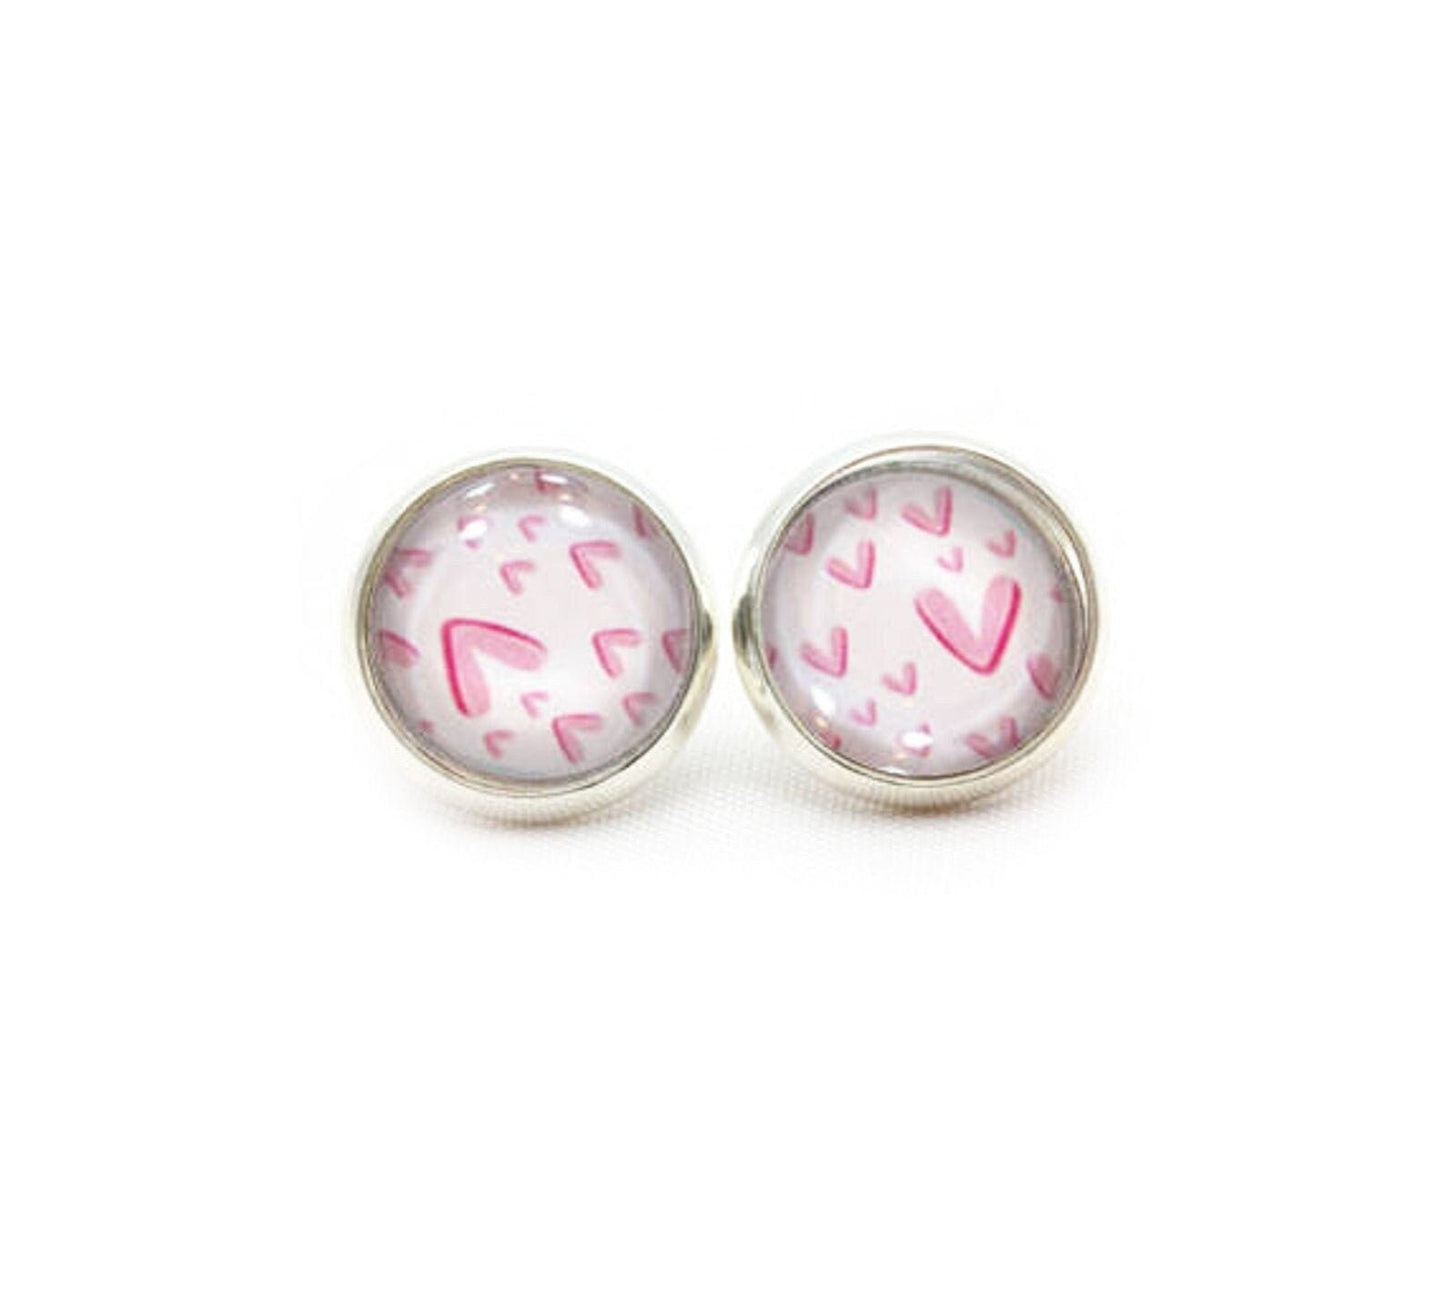 Pink Heart Stud Earrings, Glass Dome Posts, Valentines Day Gift for Her